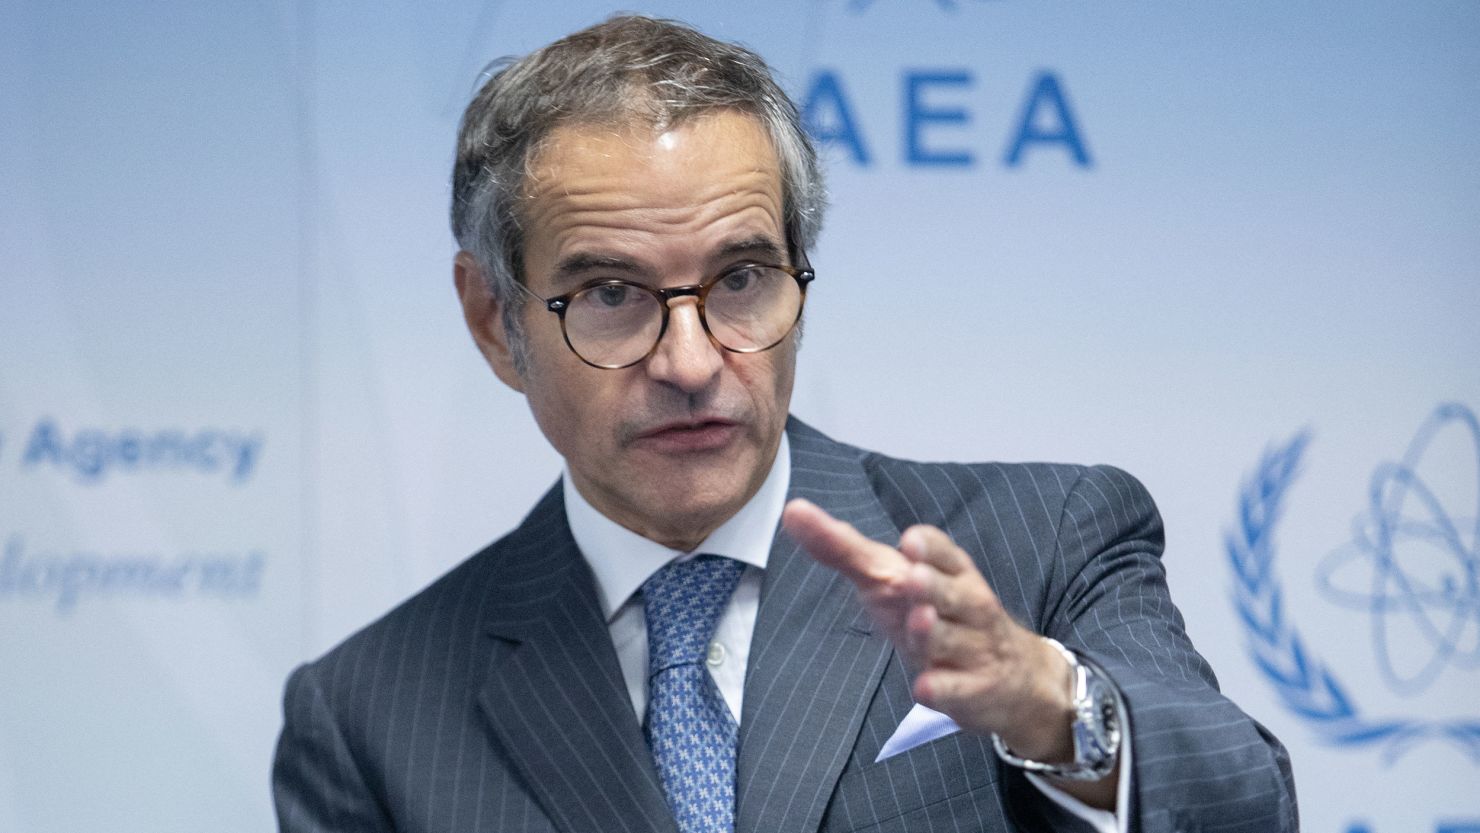 Rafael Grossi, director general of the International Atomic Energy Agency (IAEA), speaks at the agency's headquarters in Vienna, Austria, on September 11, 2023.